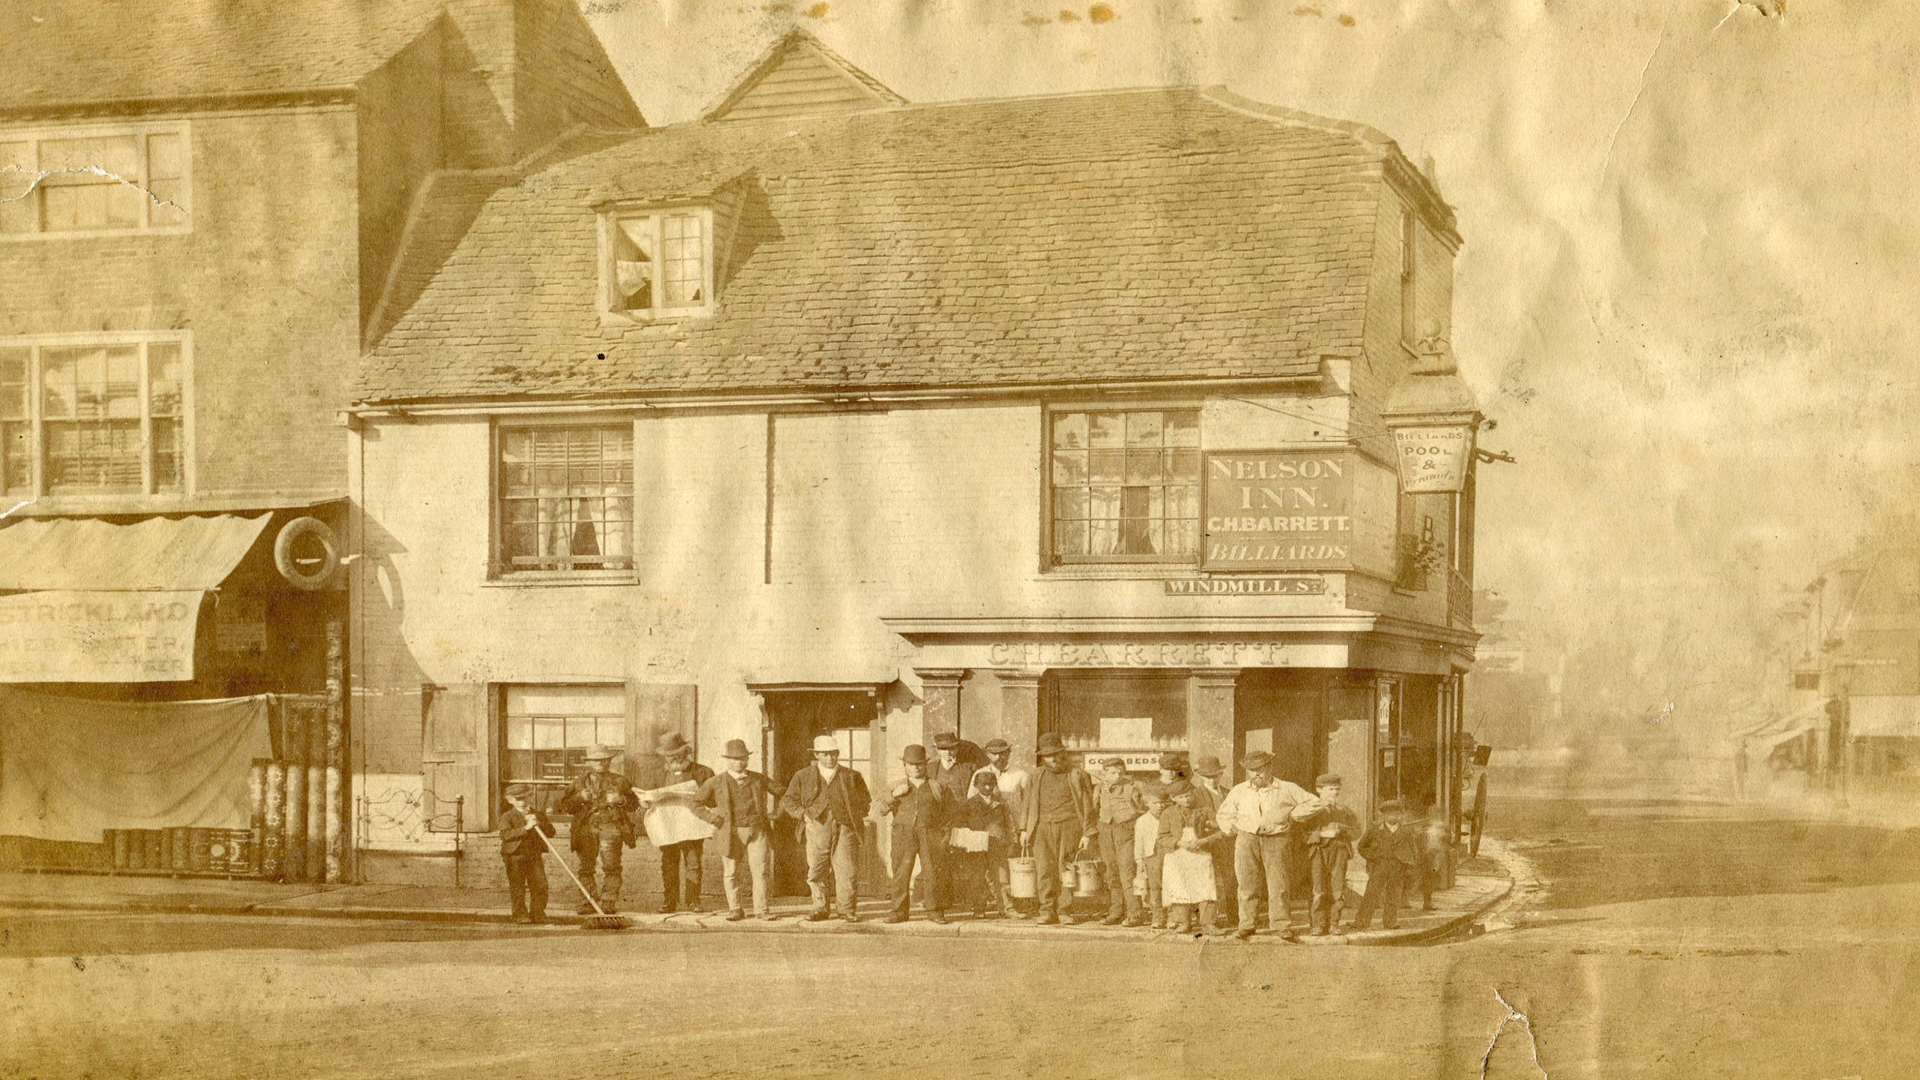 McDonalds as the formerly titled Nelson Inn, Gravesend Town Centre in 1870.